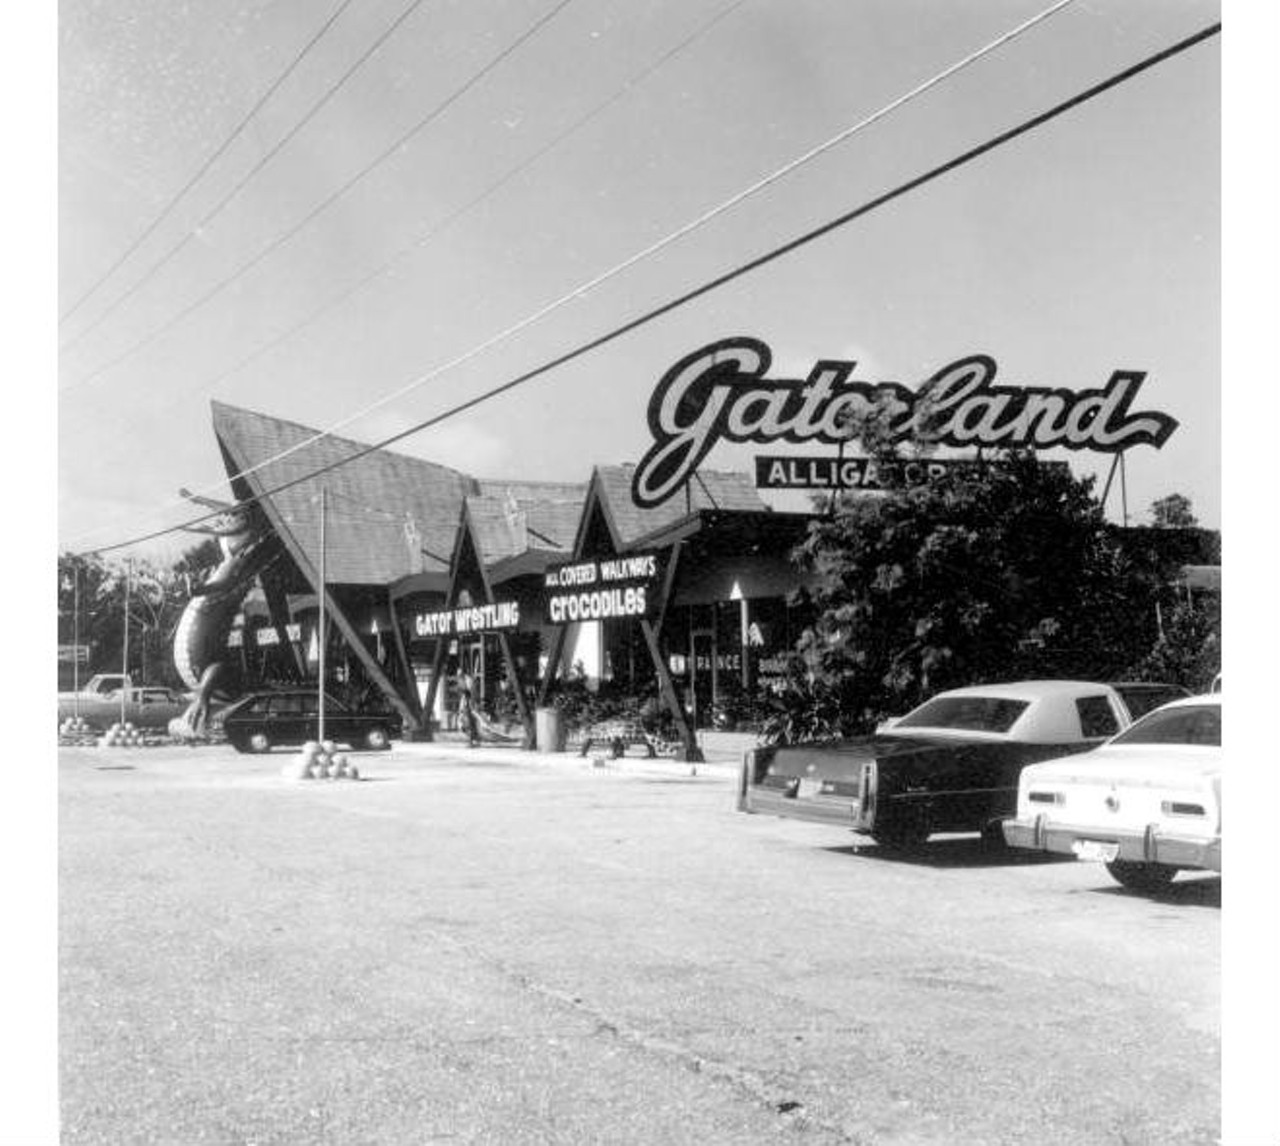 Gatorland attraction in St. Augustine.State Archives of Florida, Florida Memory